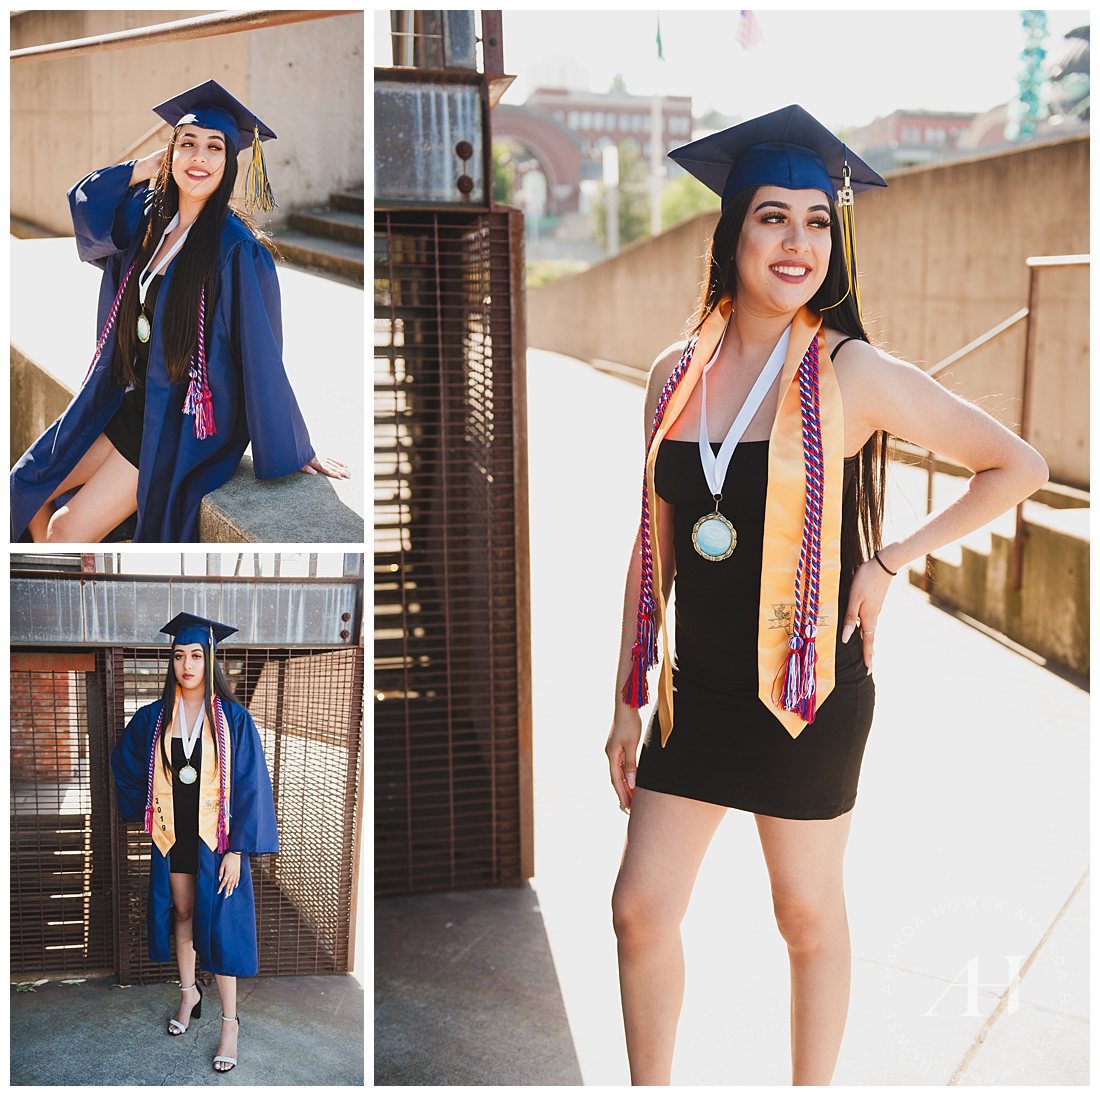 Cap and gown portraits for seniors in Tacoma photographed by Amanda Howse